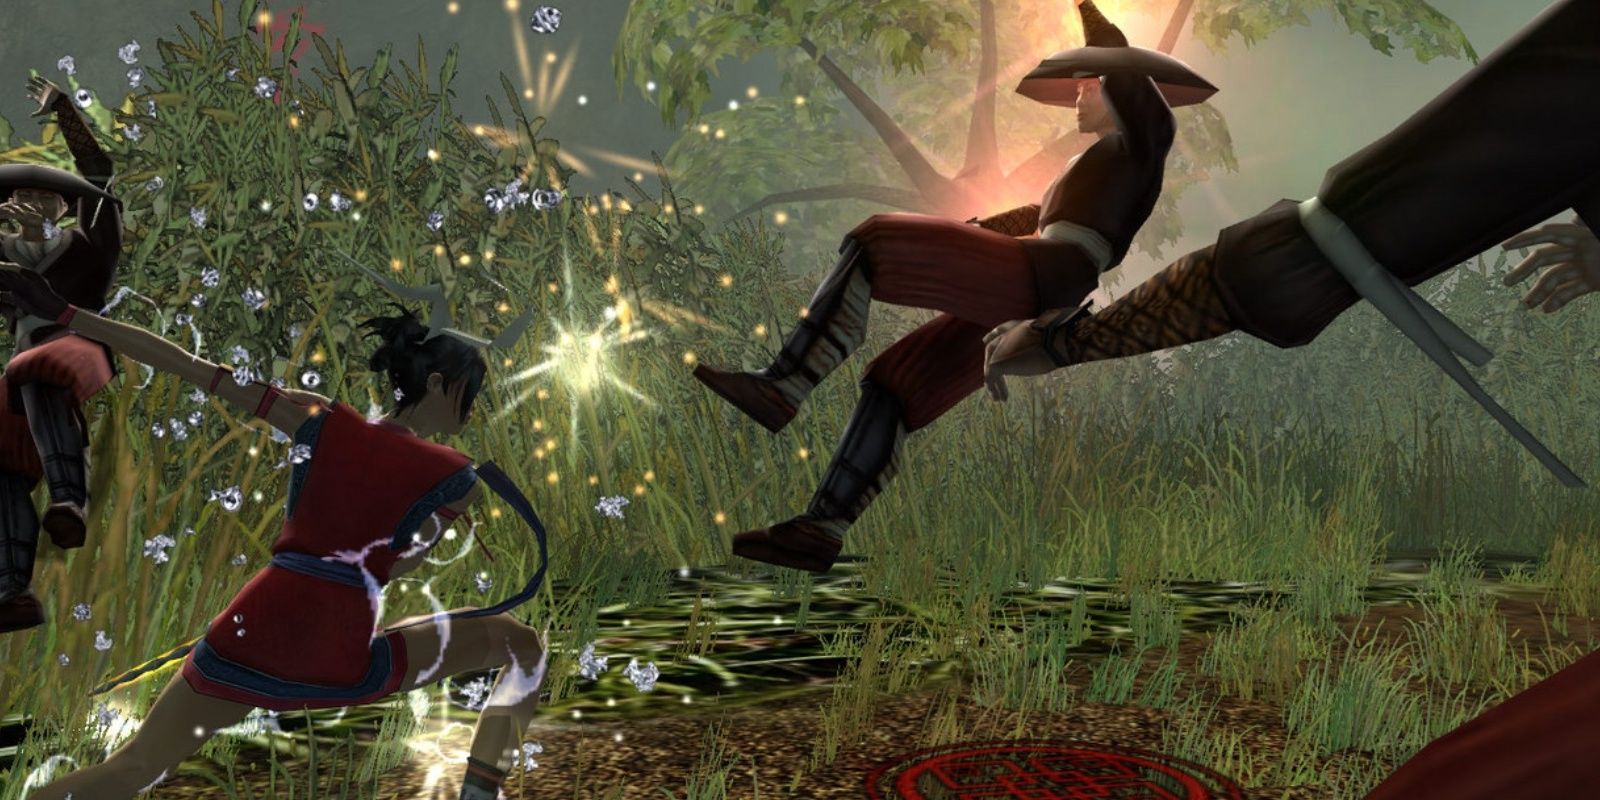 the player character from jade empire fighting enemies